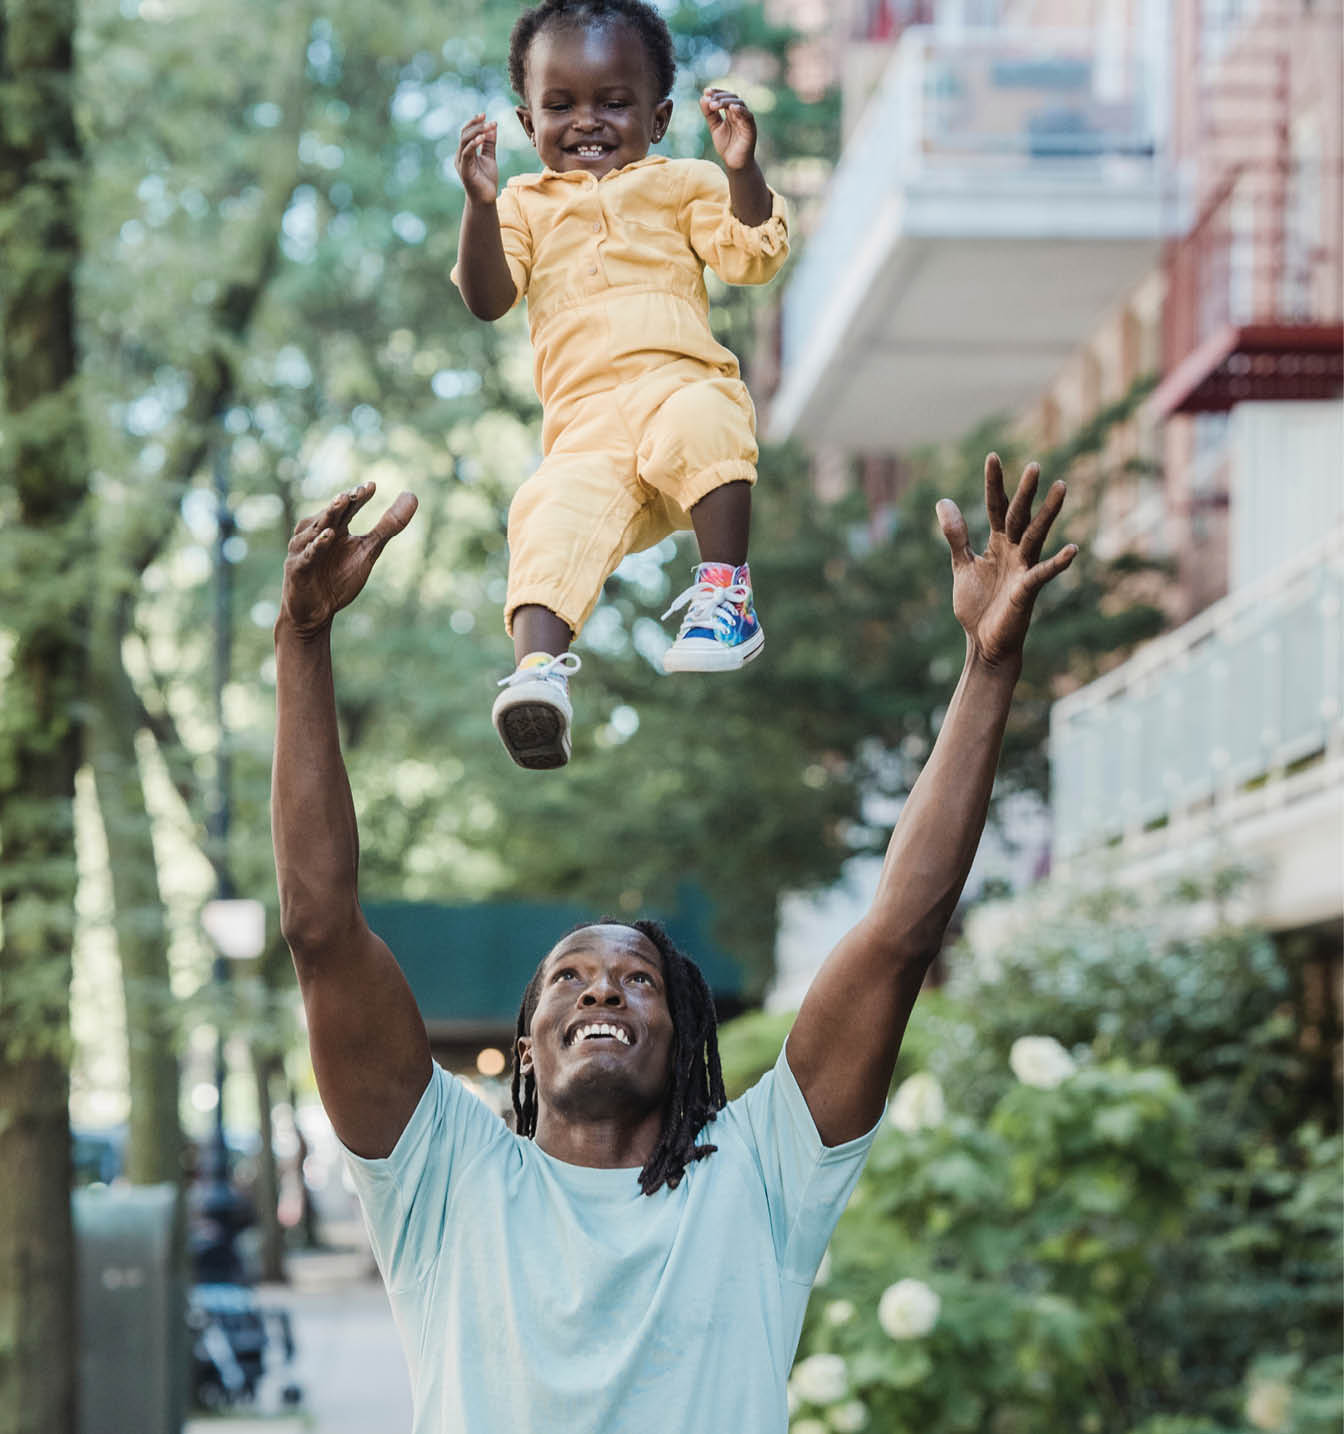 man throwing his laughing child in the air playfully smiling